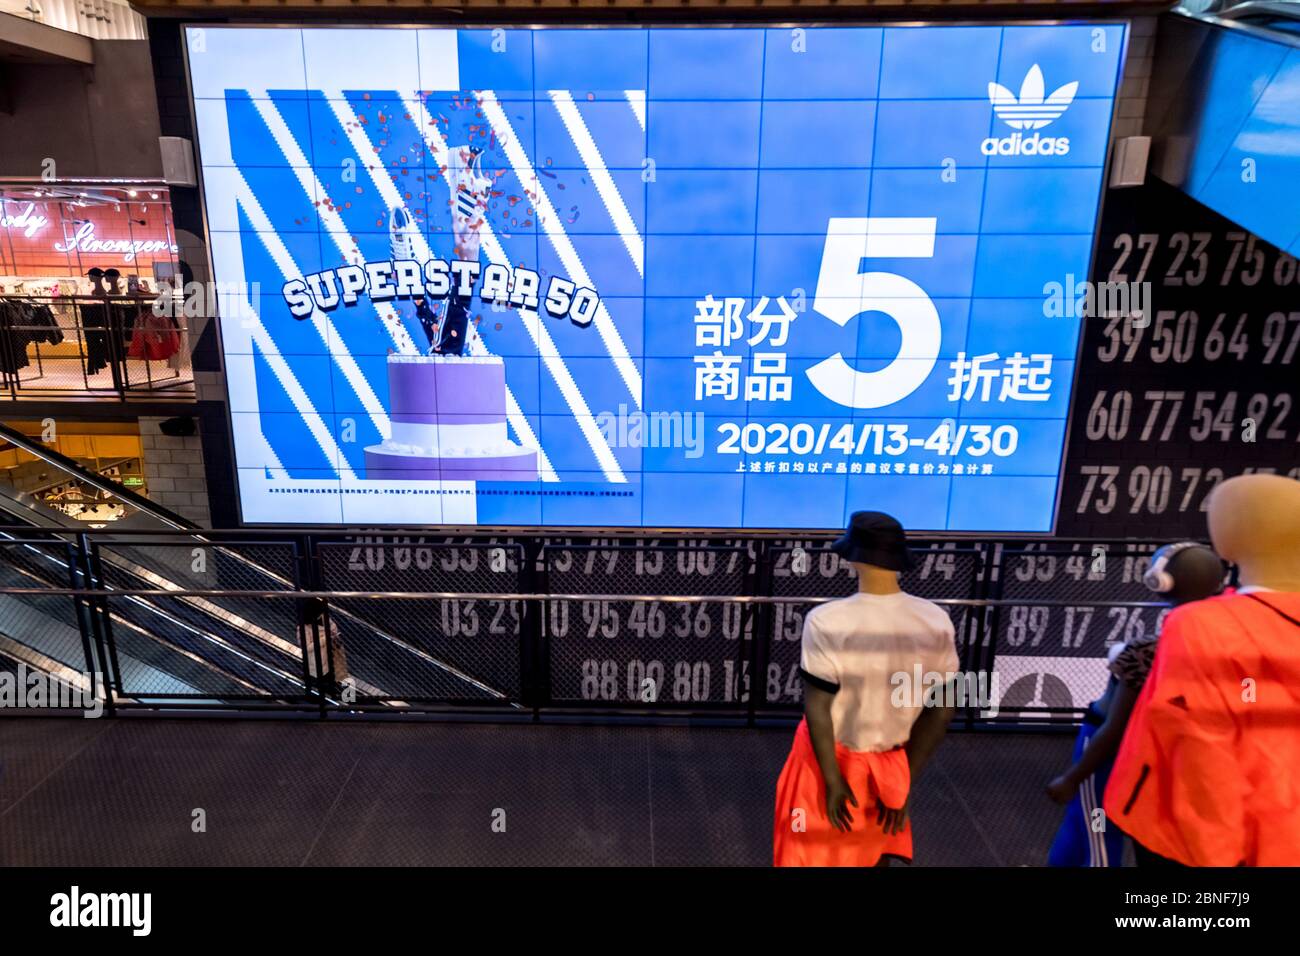 The inside view of customers selecting and purchasing products at an Adidas  store, which launches 50% off promotion, Shanghai, China, 24 April 2020. *  Stock Photo - Alamy